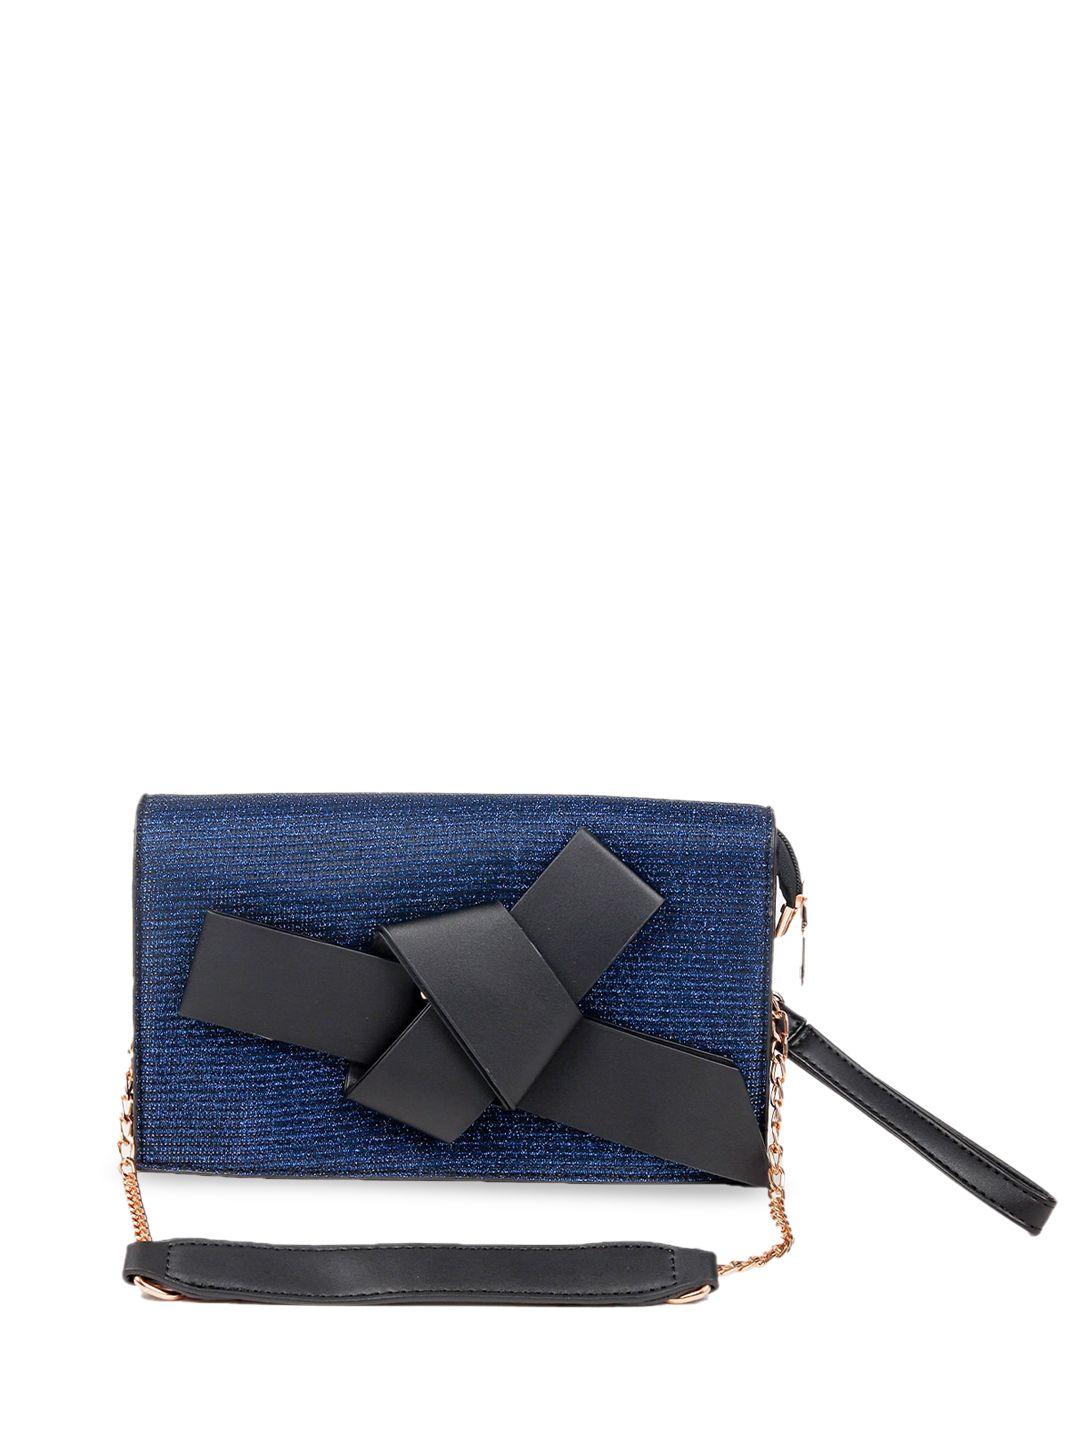 odette navy blue printed structured sling bag with bow detail